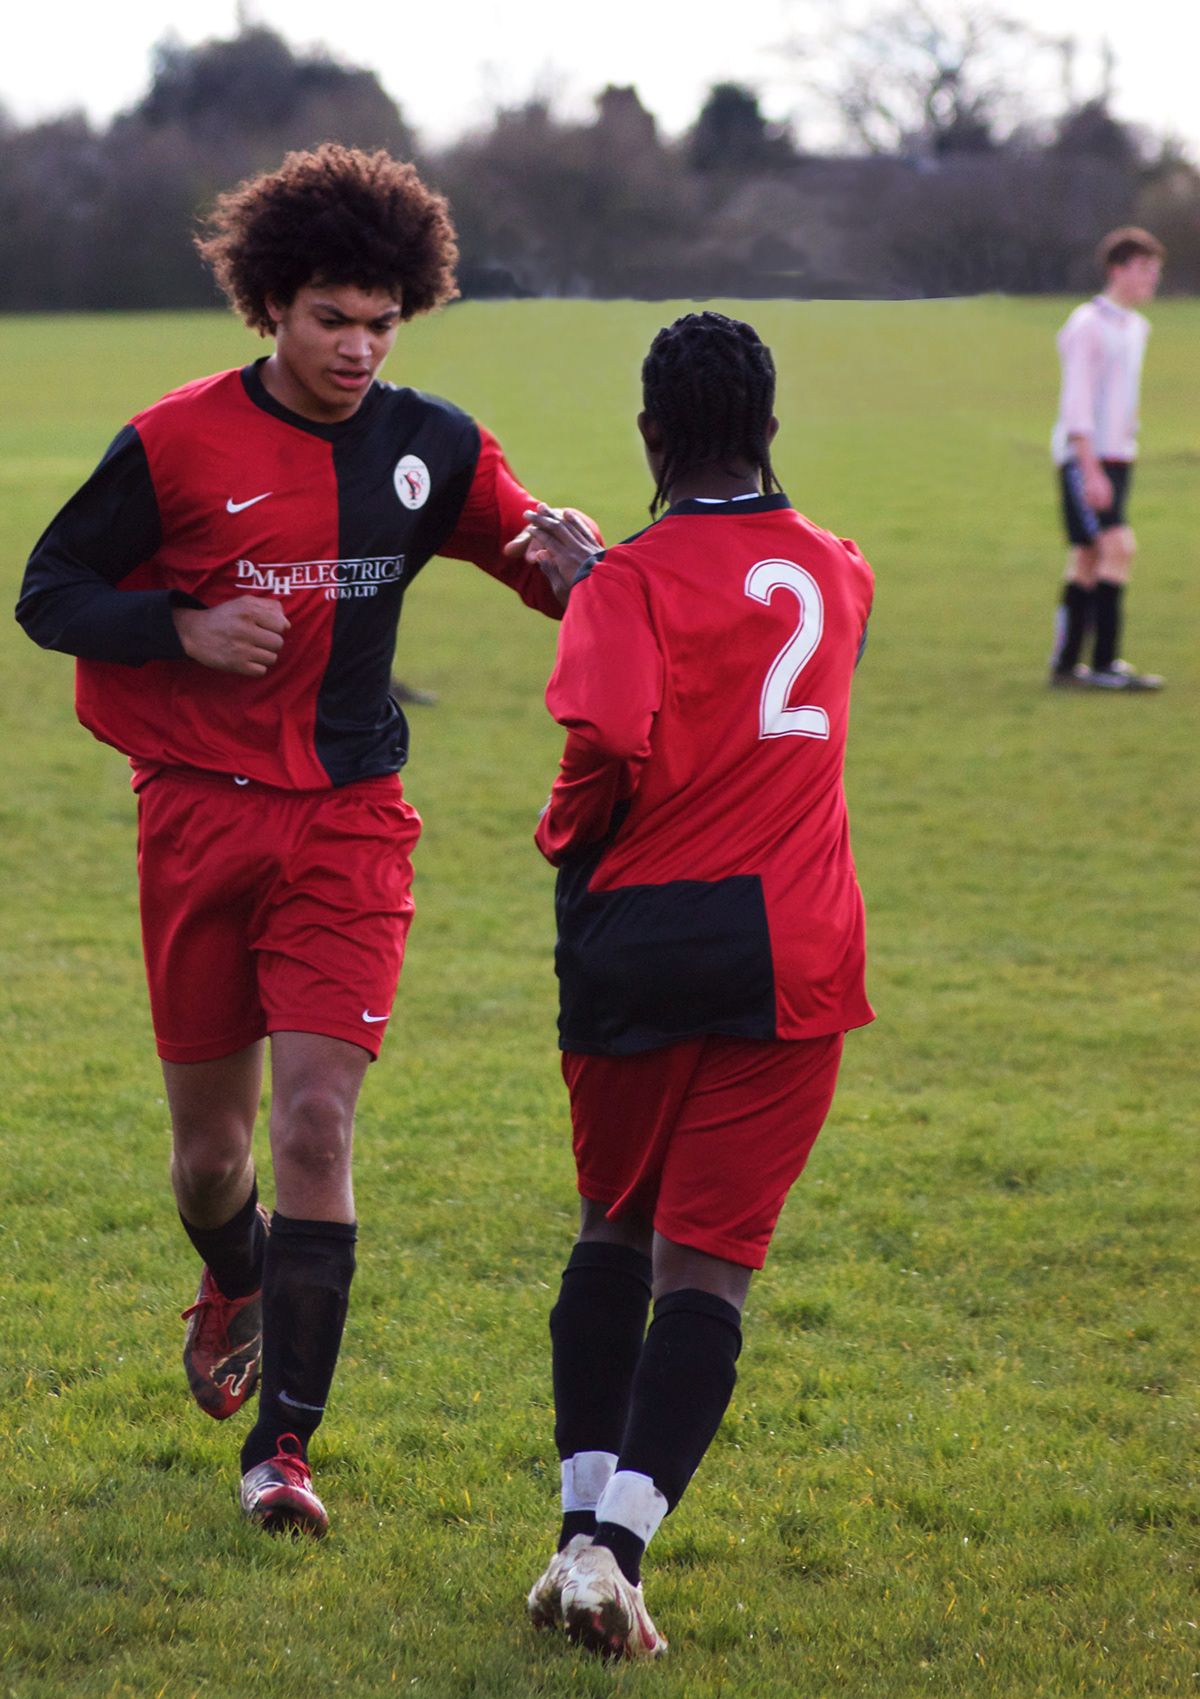 football grassroots editorial youth england